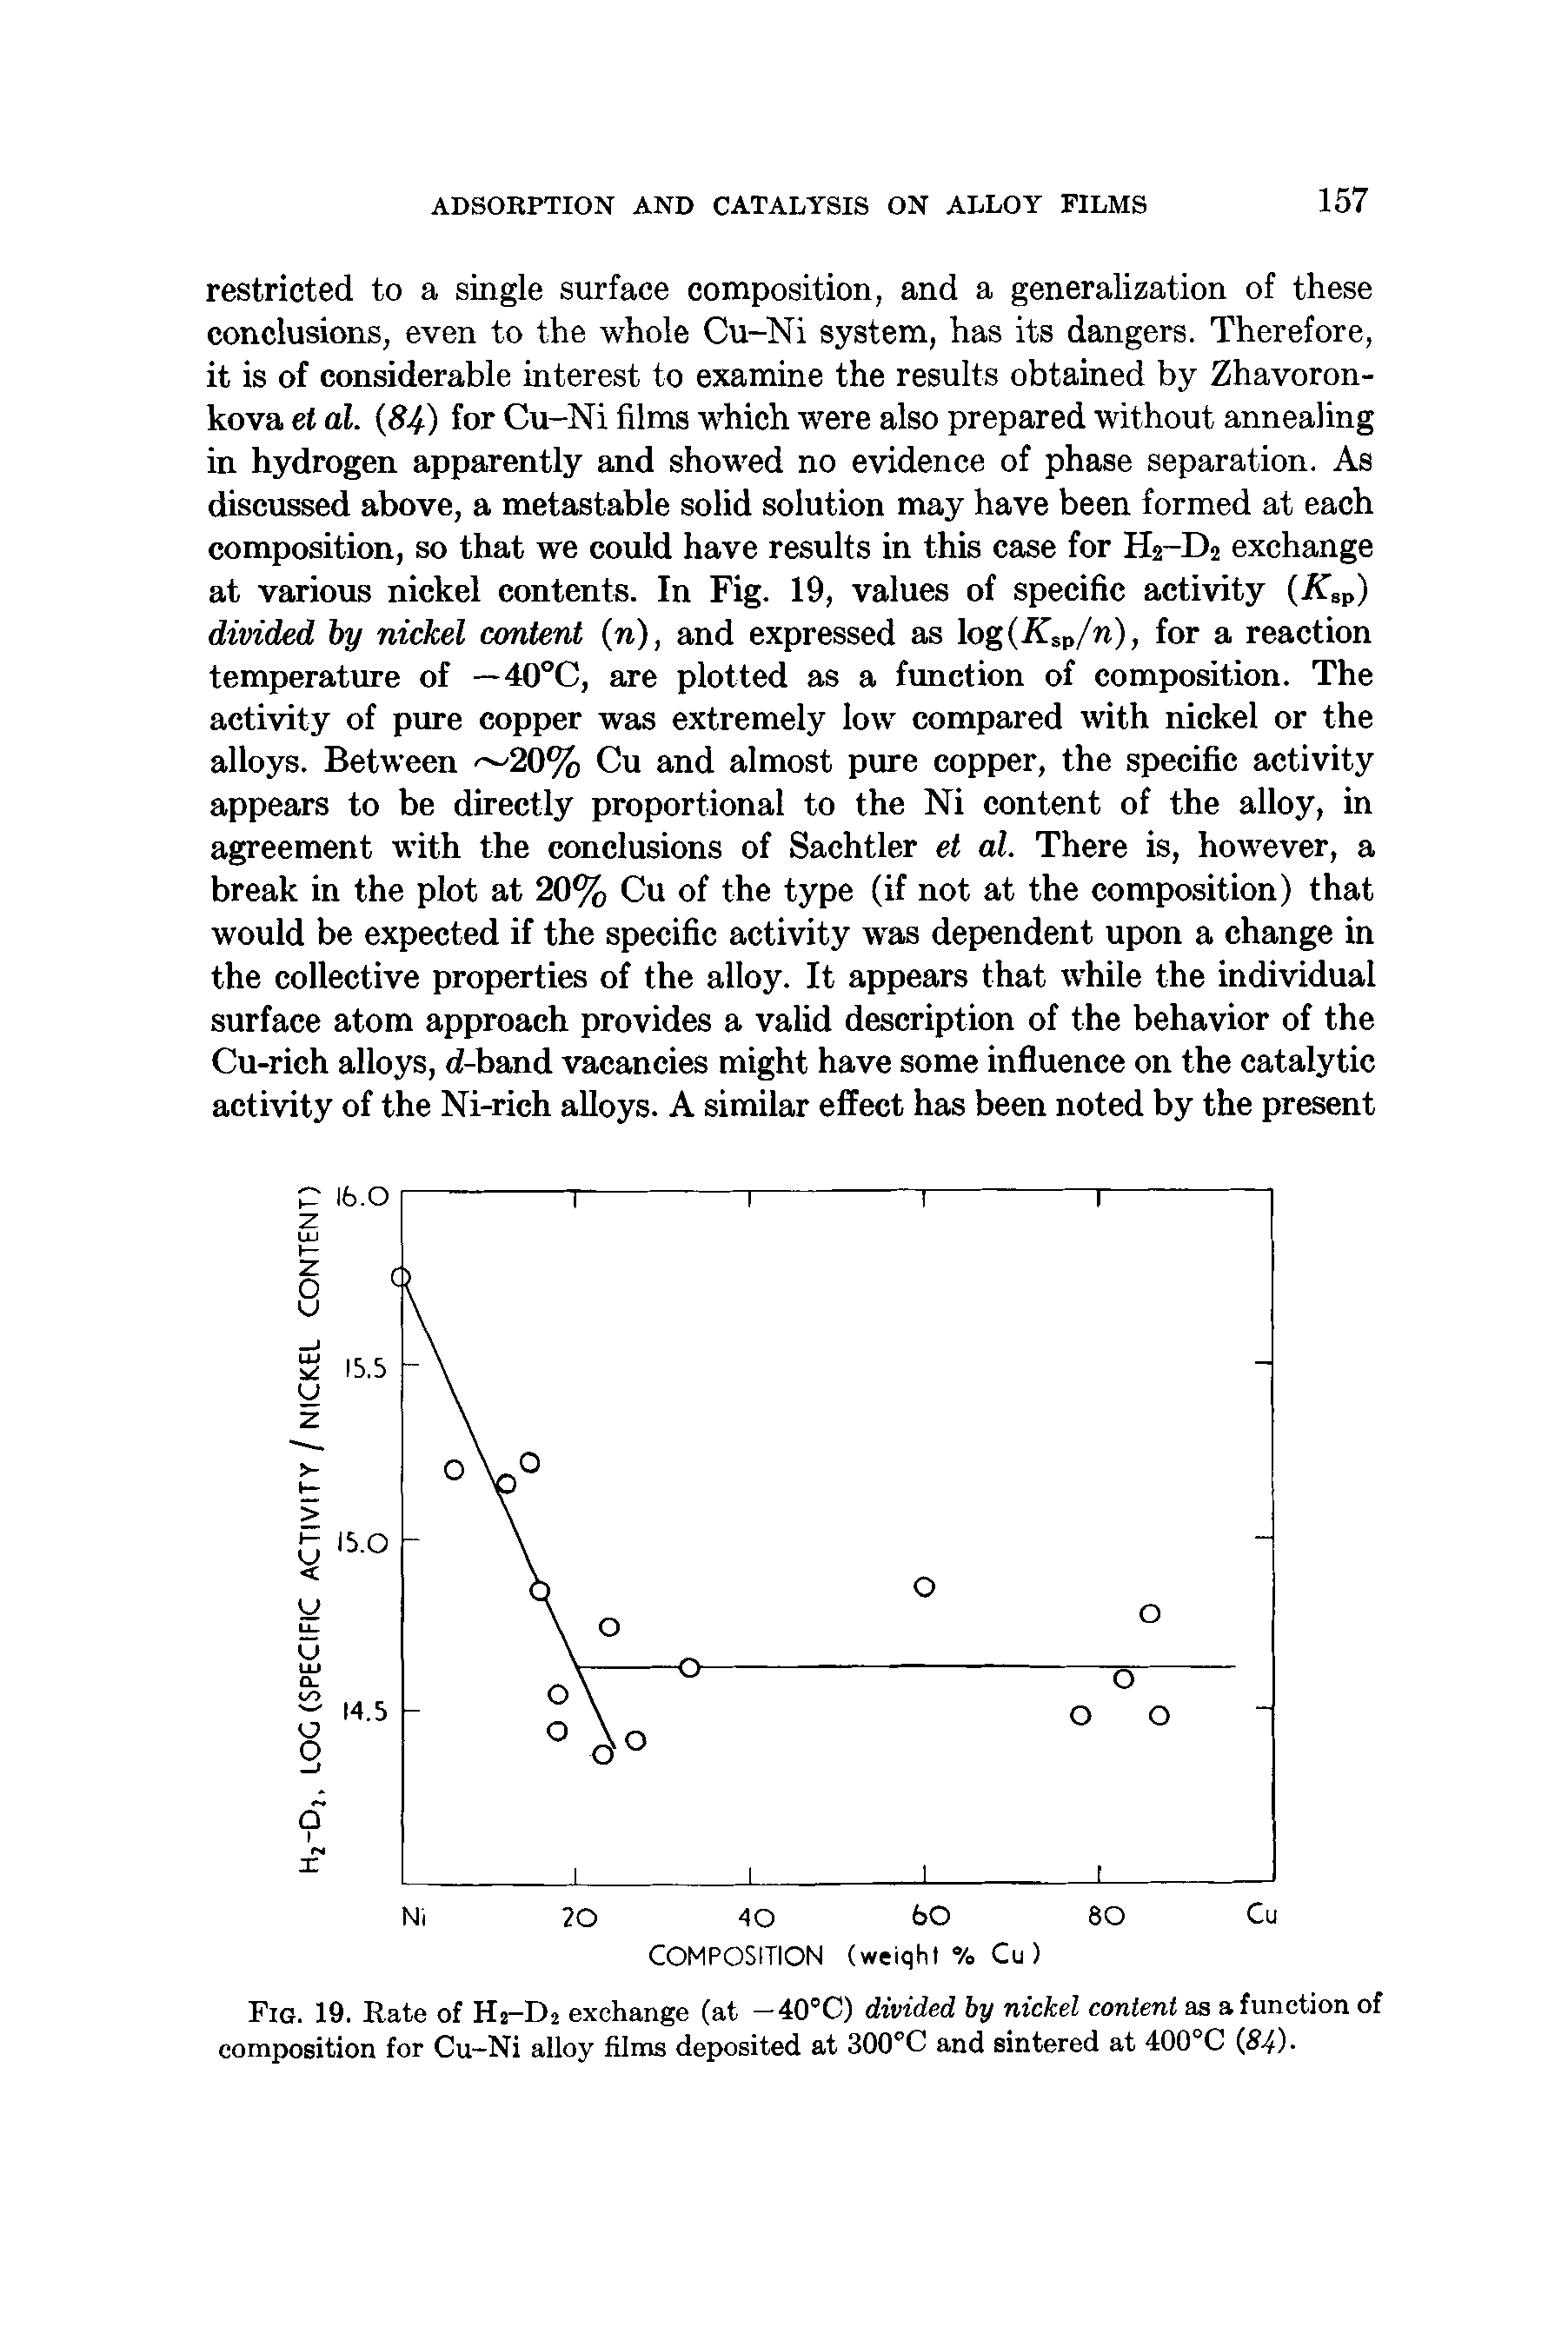 Fig. 19. Rate of H2-D2 exchange (at -40°C) divided by nickel content as a function of composition for Cu-Ni alloy films deposited at 300°C and sintered at 400°C 84).